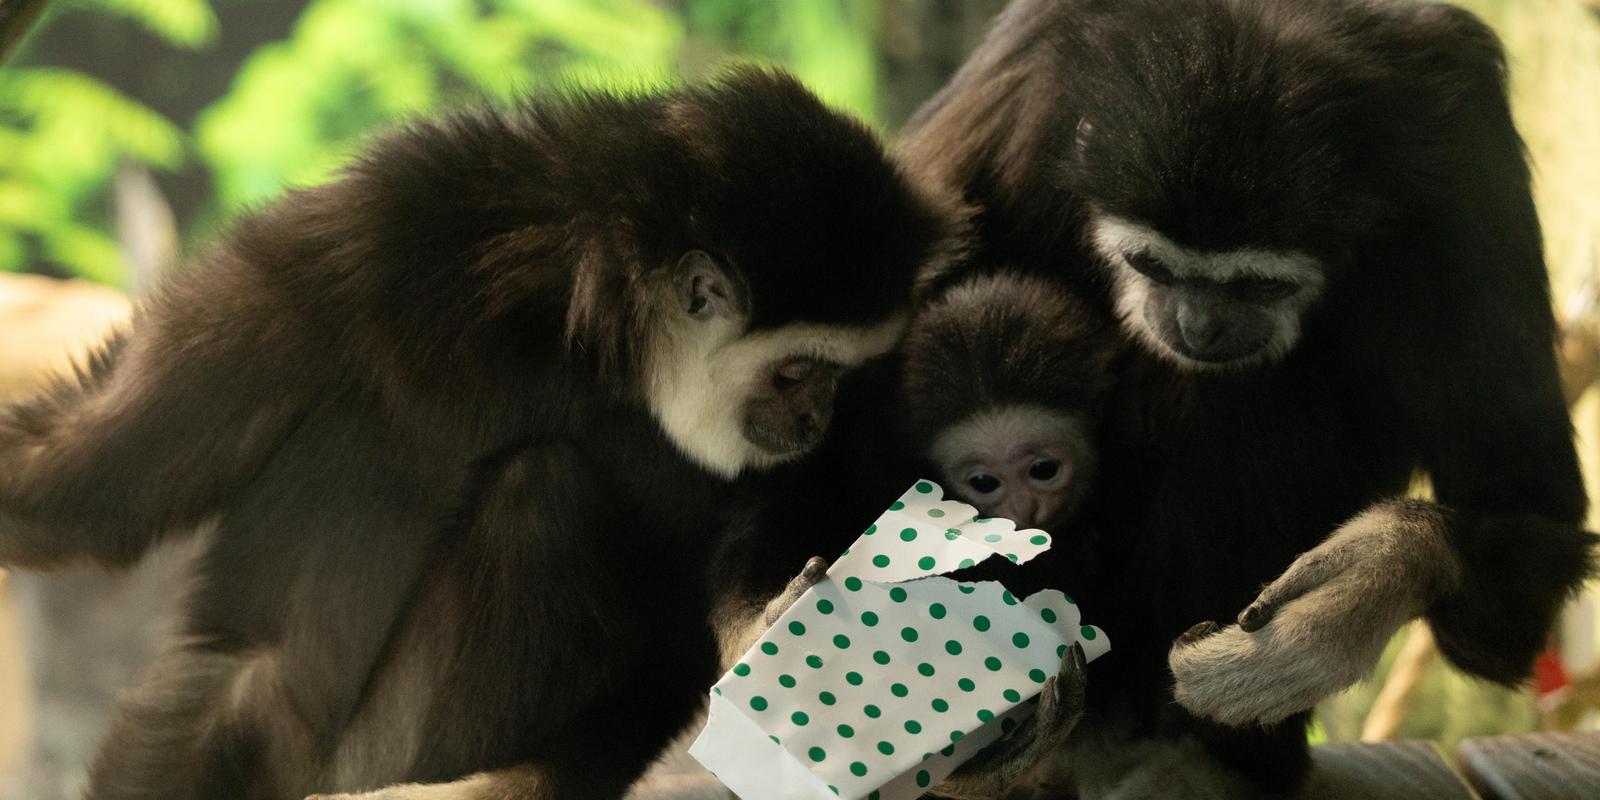 Gibbon family eating food out of a gift box